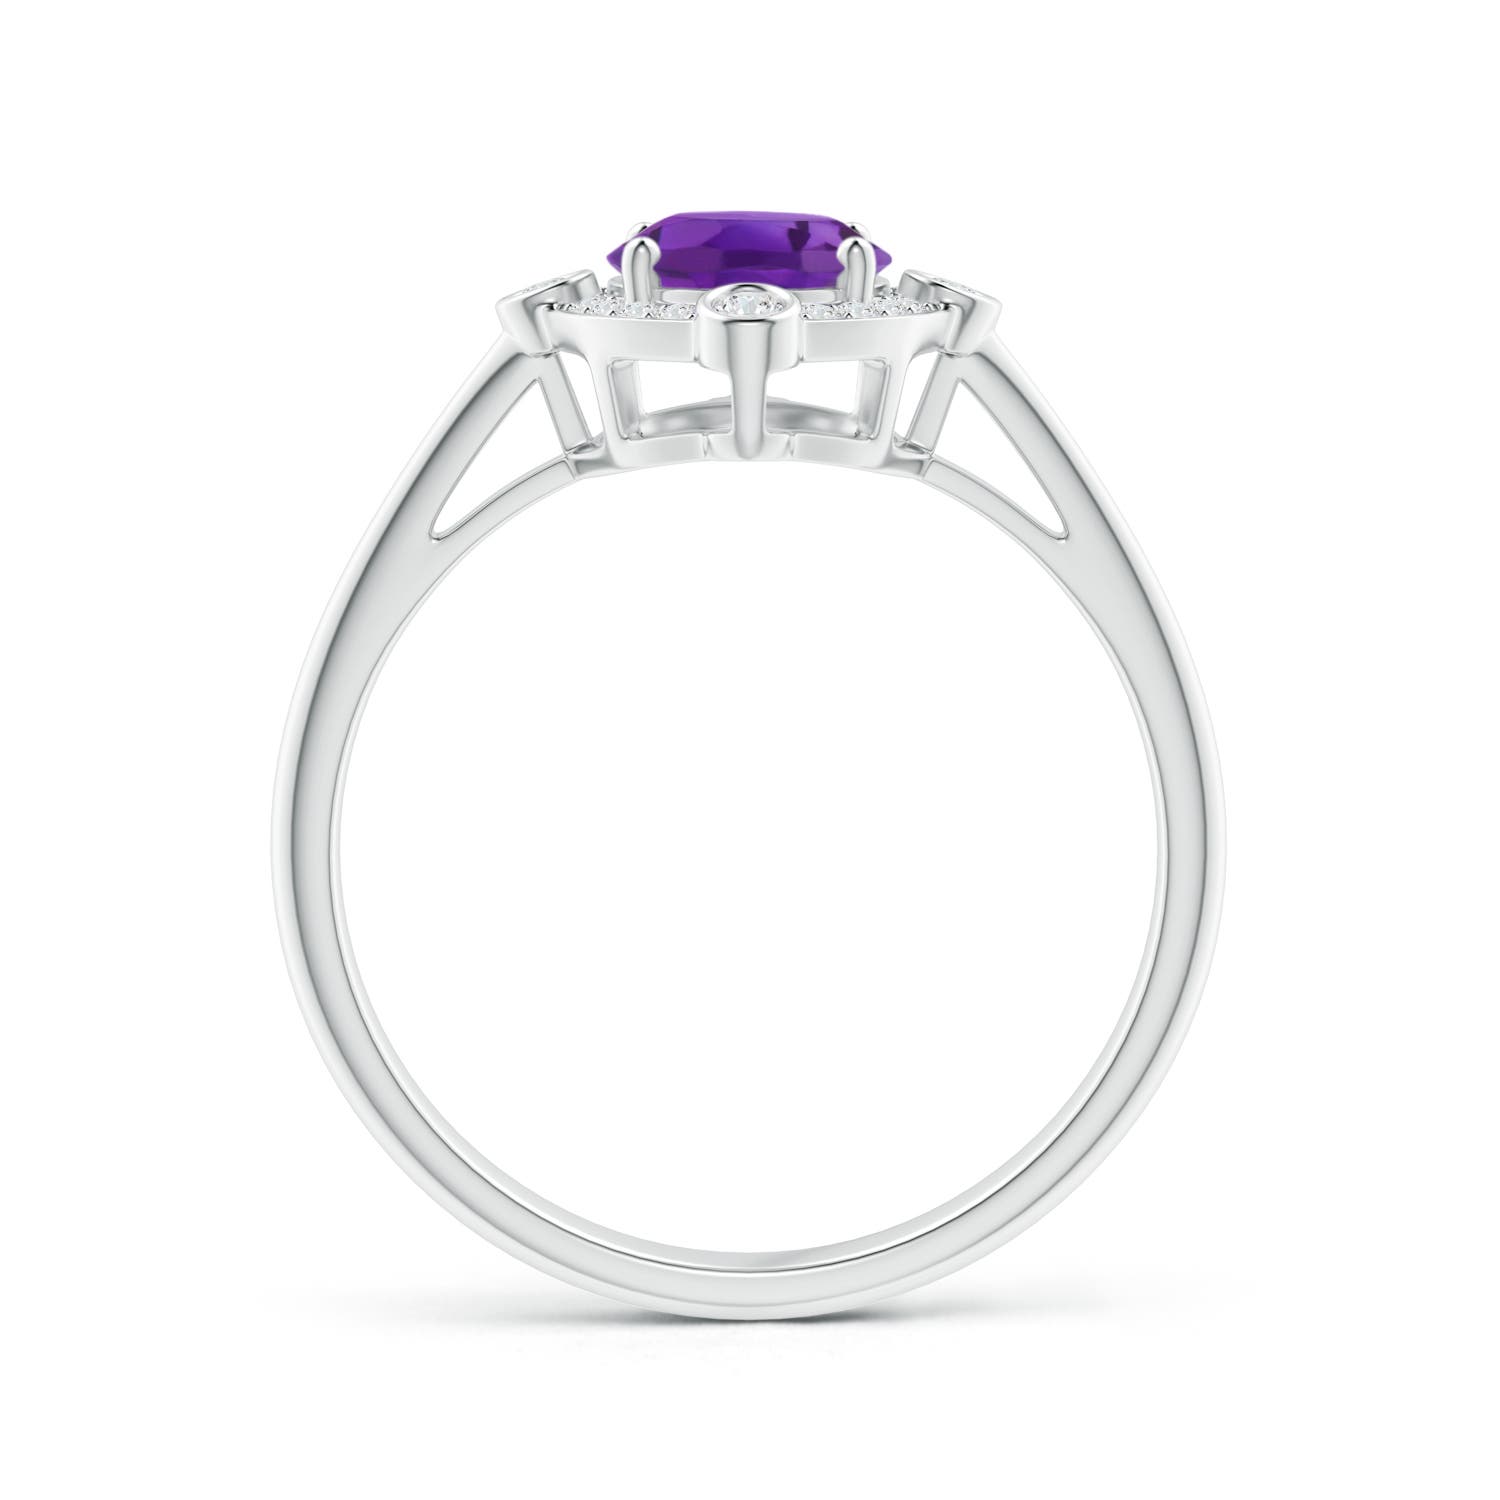 AAA - Amethyst / 1.29 CT / 14 KT White Gold